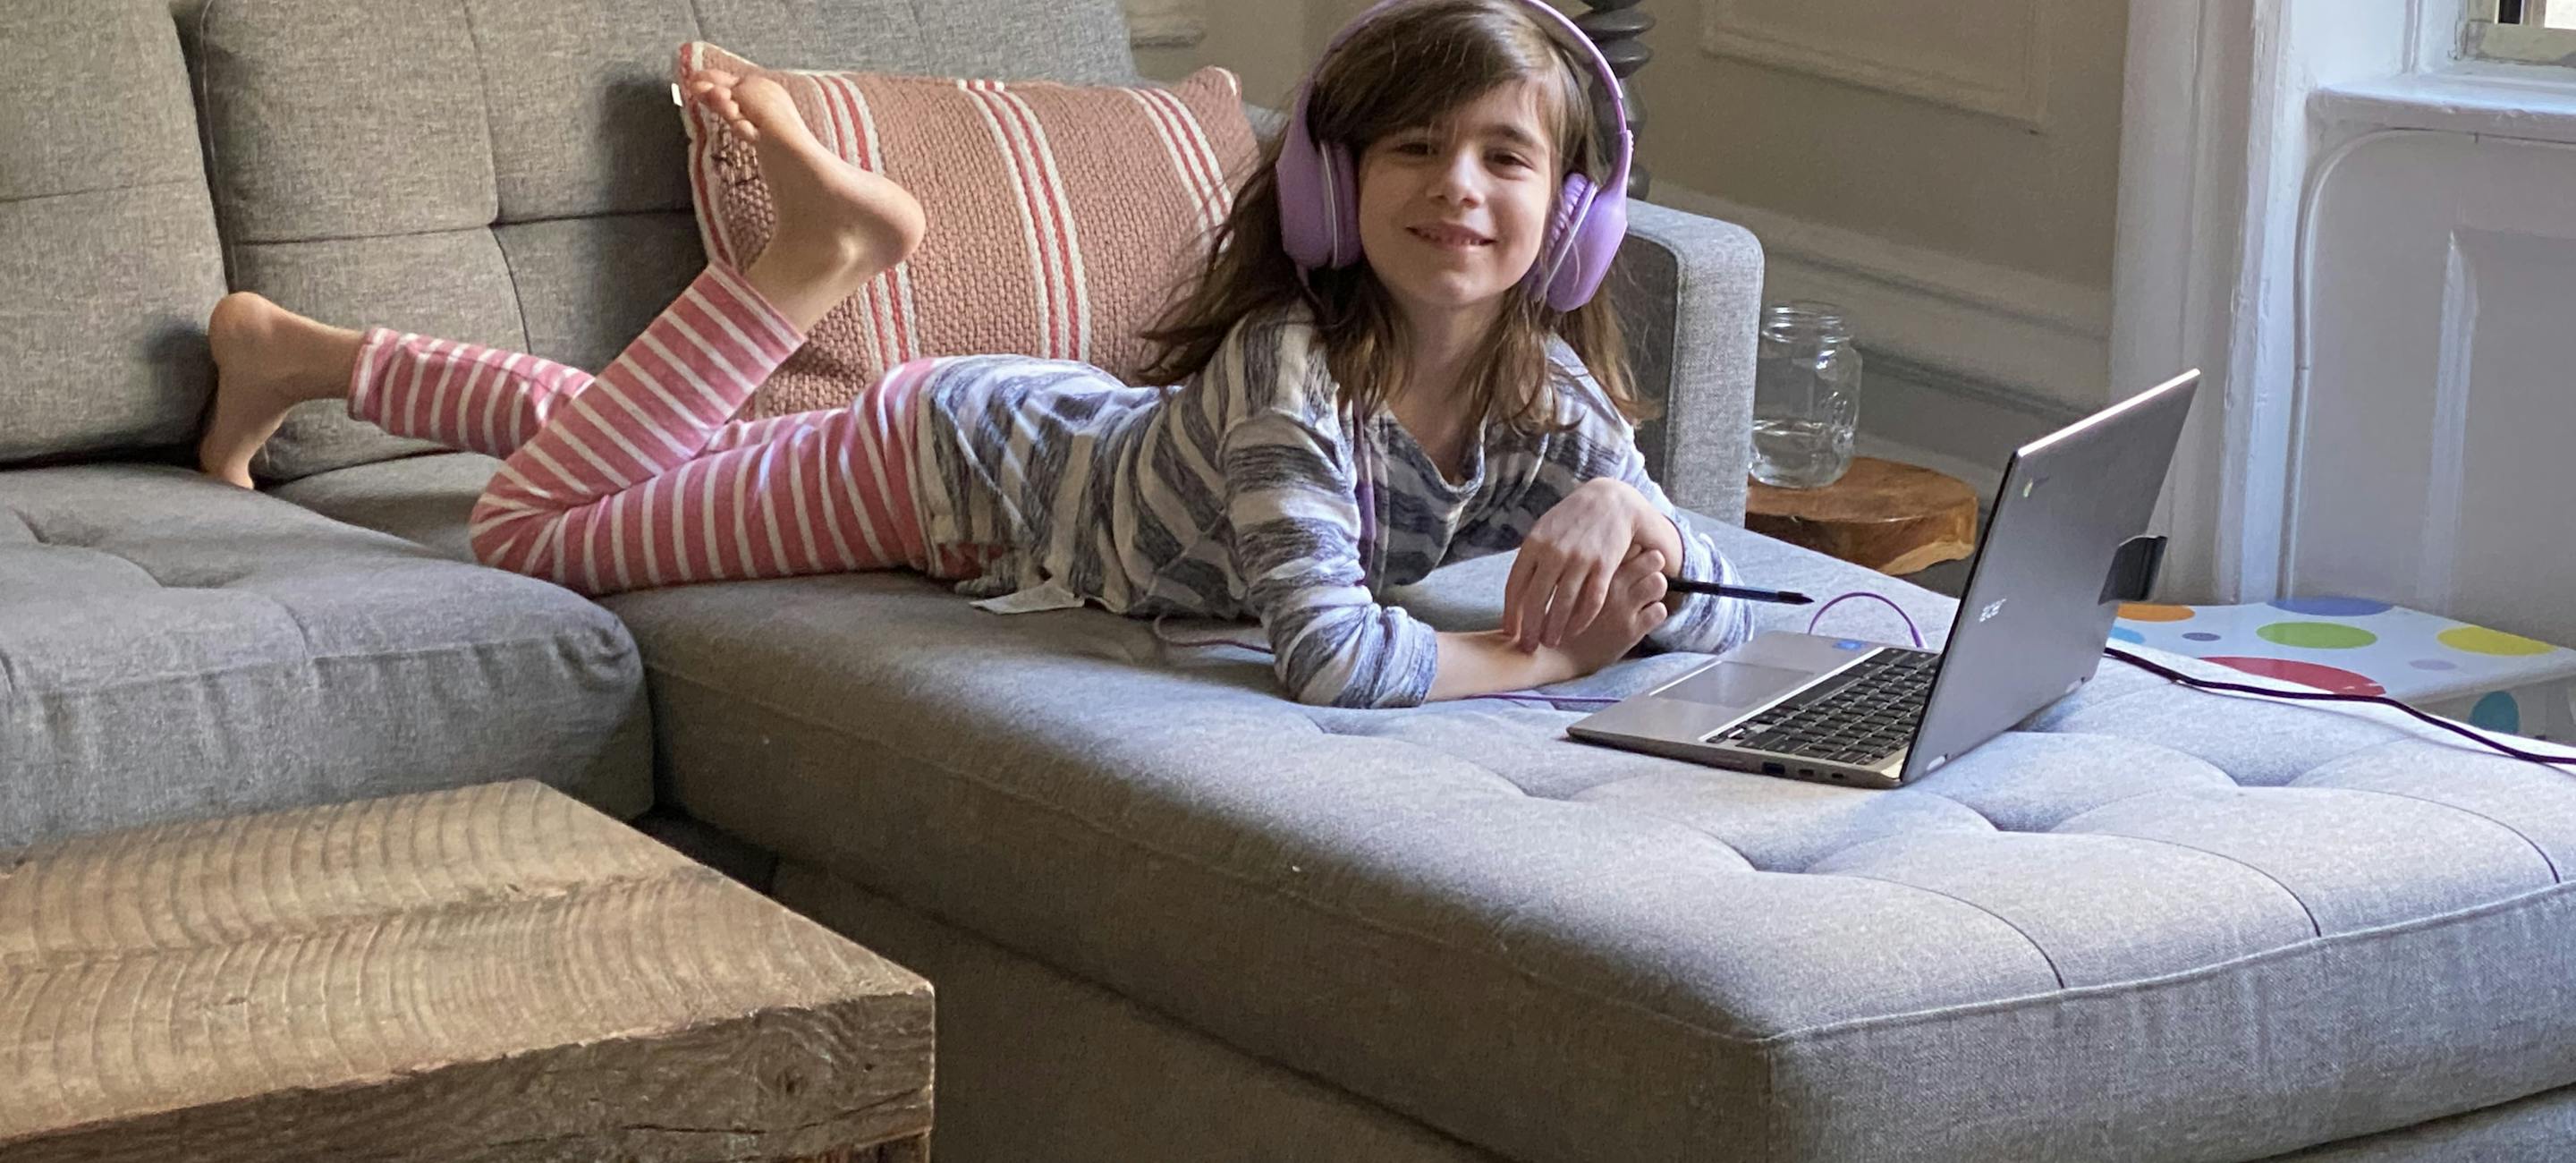 young white girl wearing headphones, laying on a couch and interacting with a computer